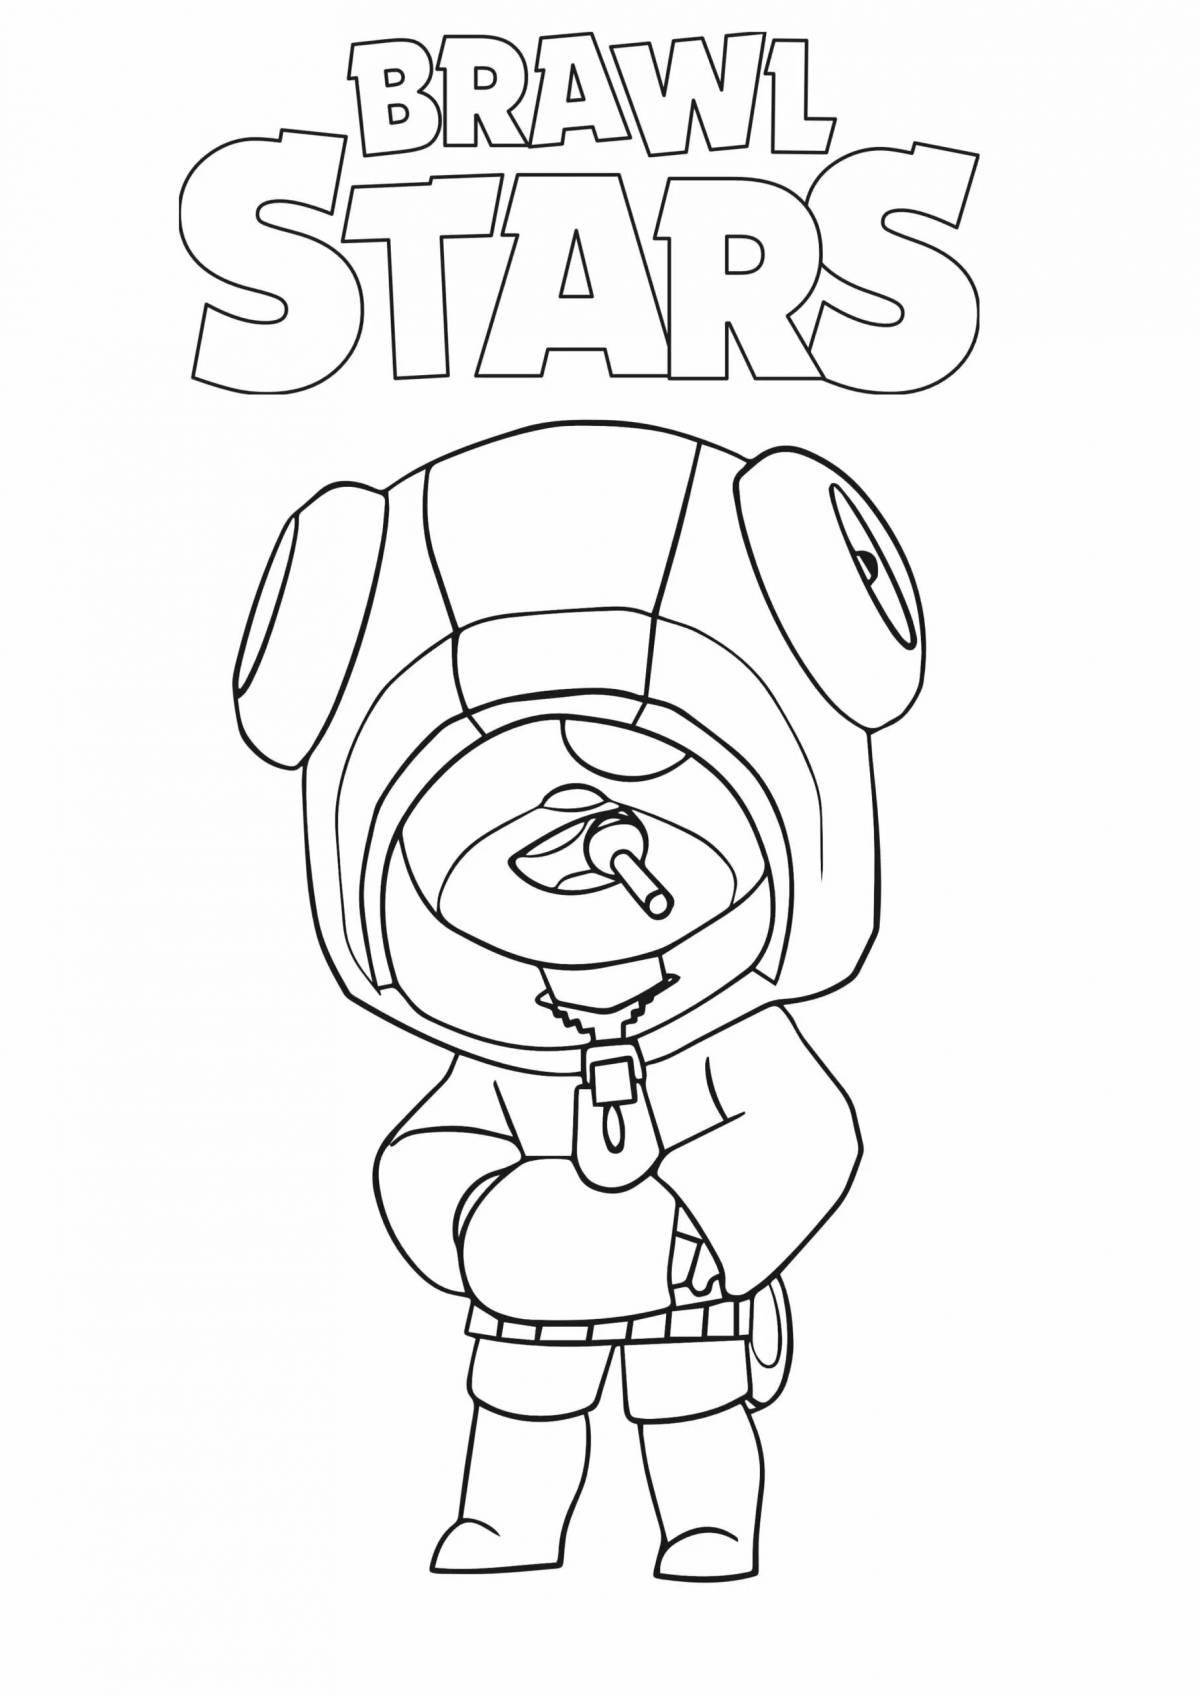 Coloring page exciting leon brawl stars